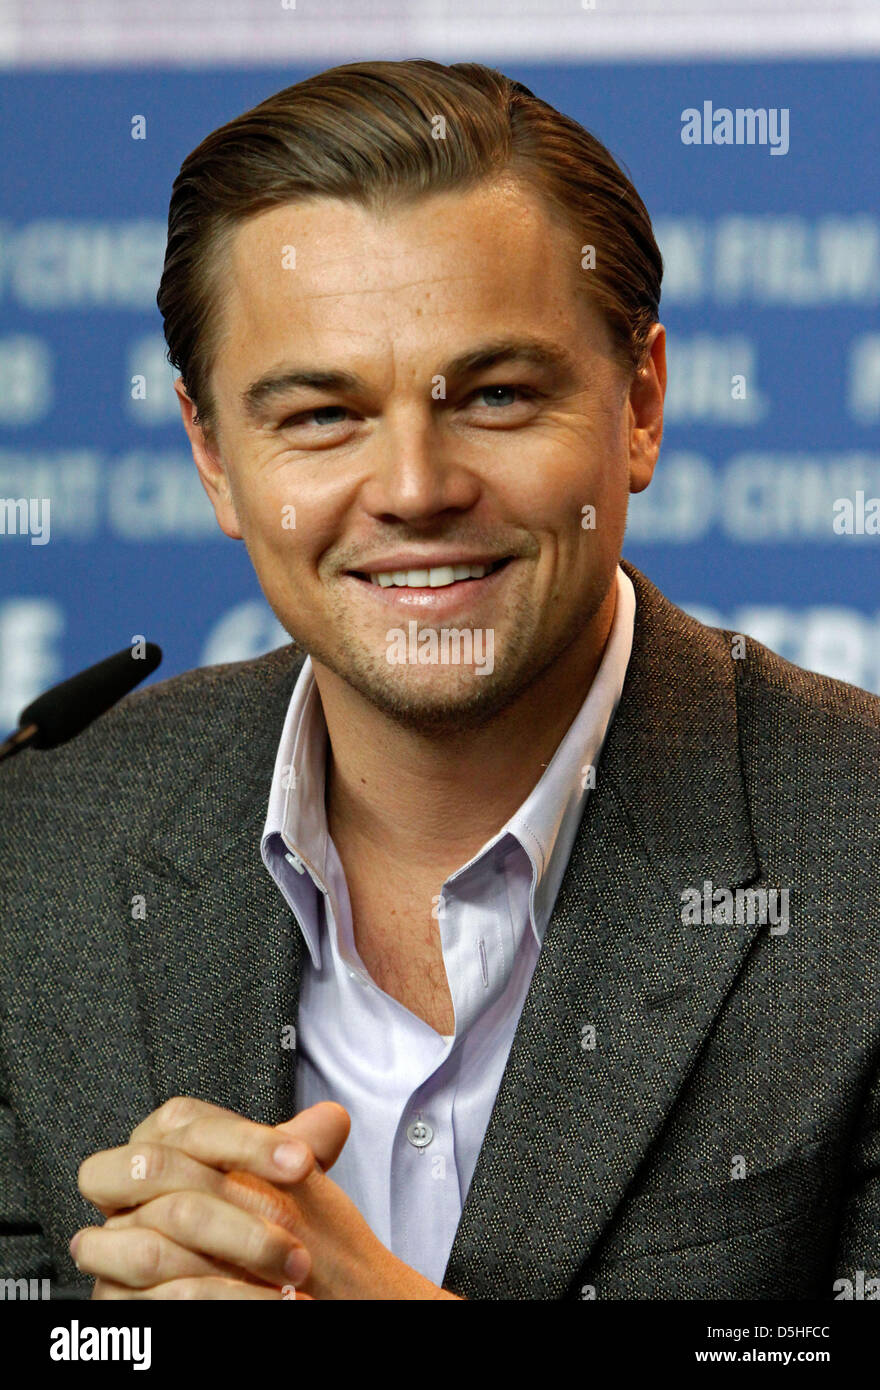 US actor Leonardo DiCaprio attends the press conference for the film 'Shutter Island' during the 60th Berlinale International Film Festival in Berlin, Germany, on Saturday, 13 February 2010. The festival runs until 21 Febuary 2010. Photo: Hubert Boesl Stock Photo